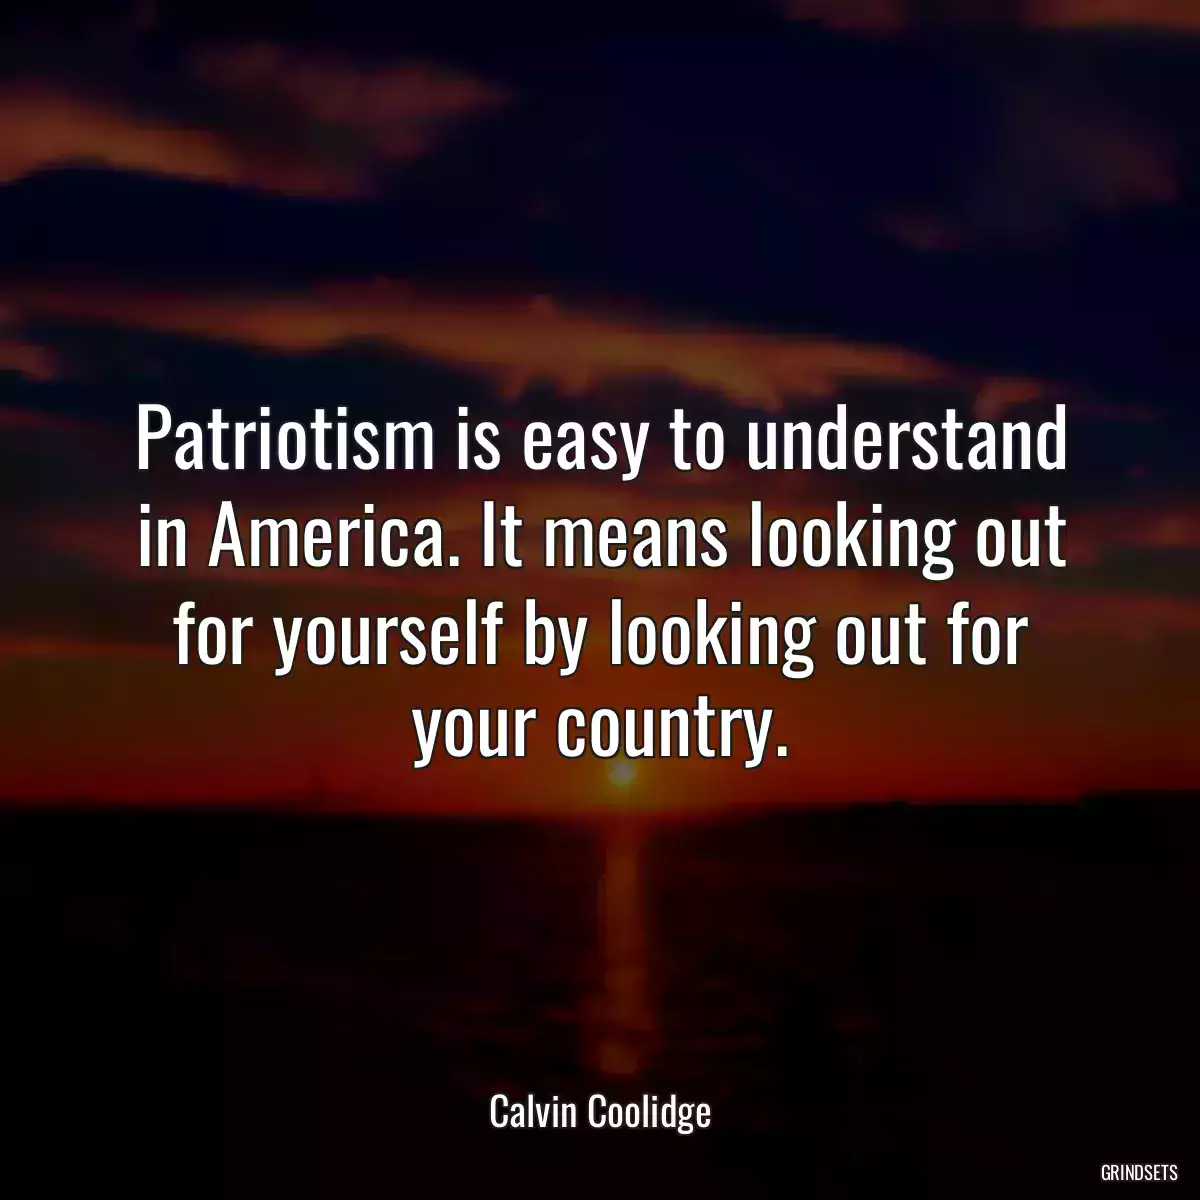 Patriotism is easy to understand in America. It means looking out for yourself by looking out for your country.